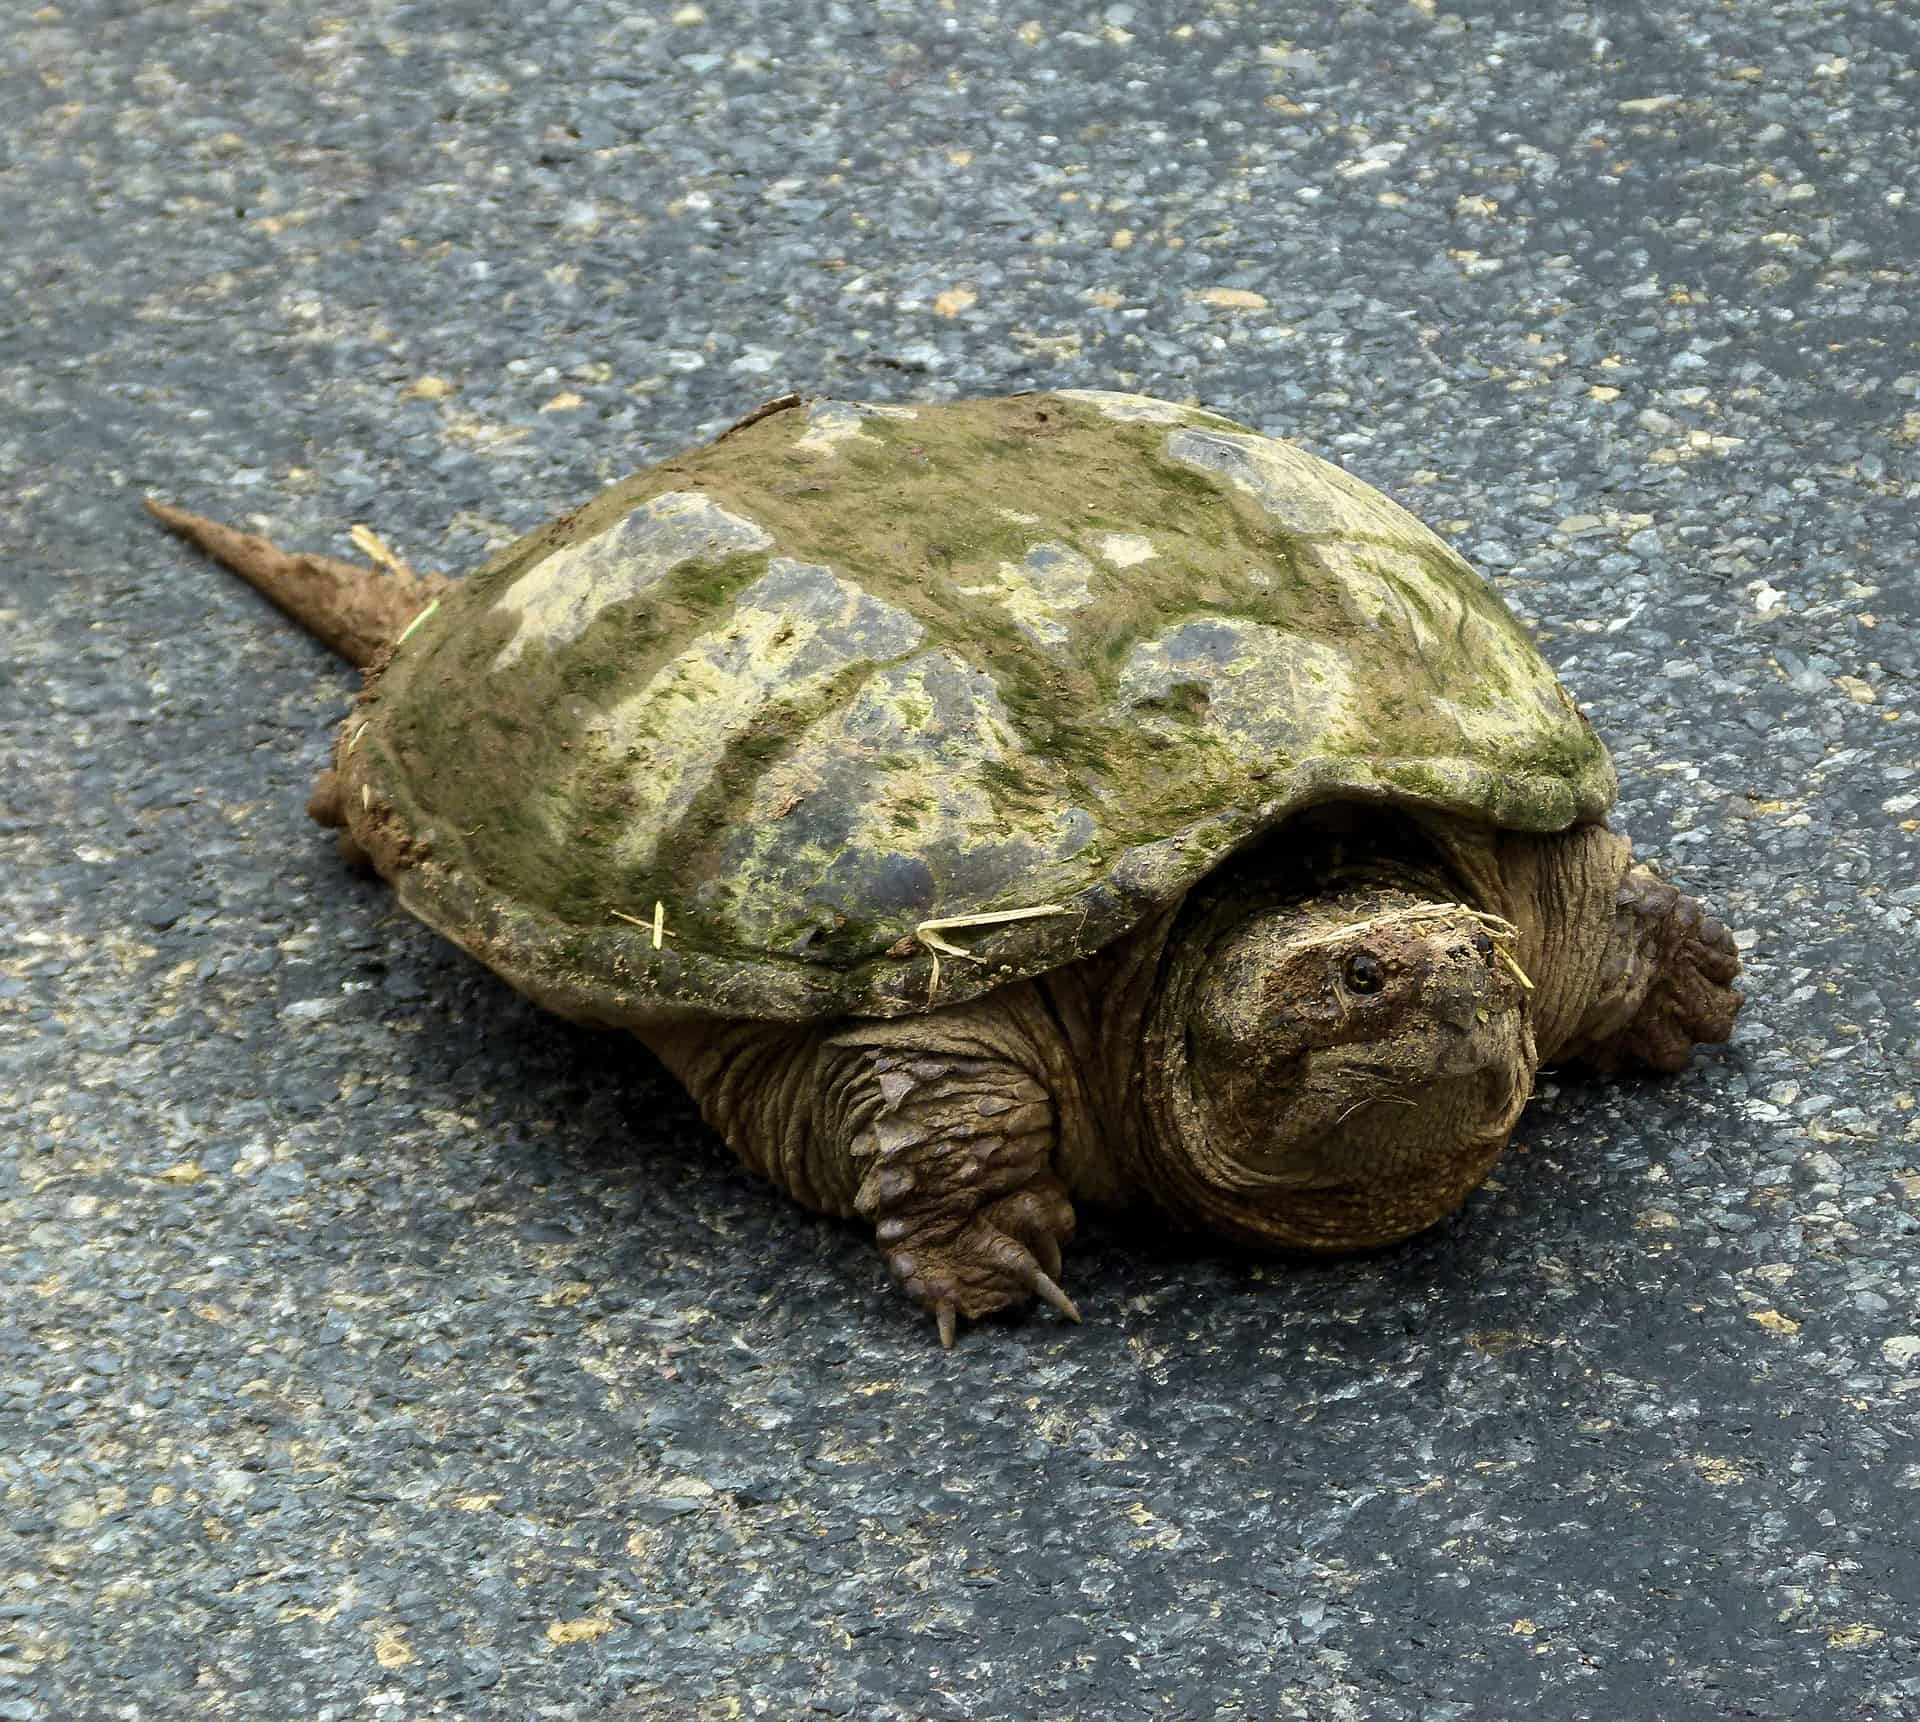 (Ultimate Guide) Snapping Turtles: Everything You Need to Know